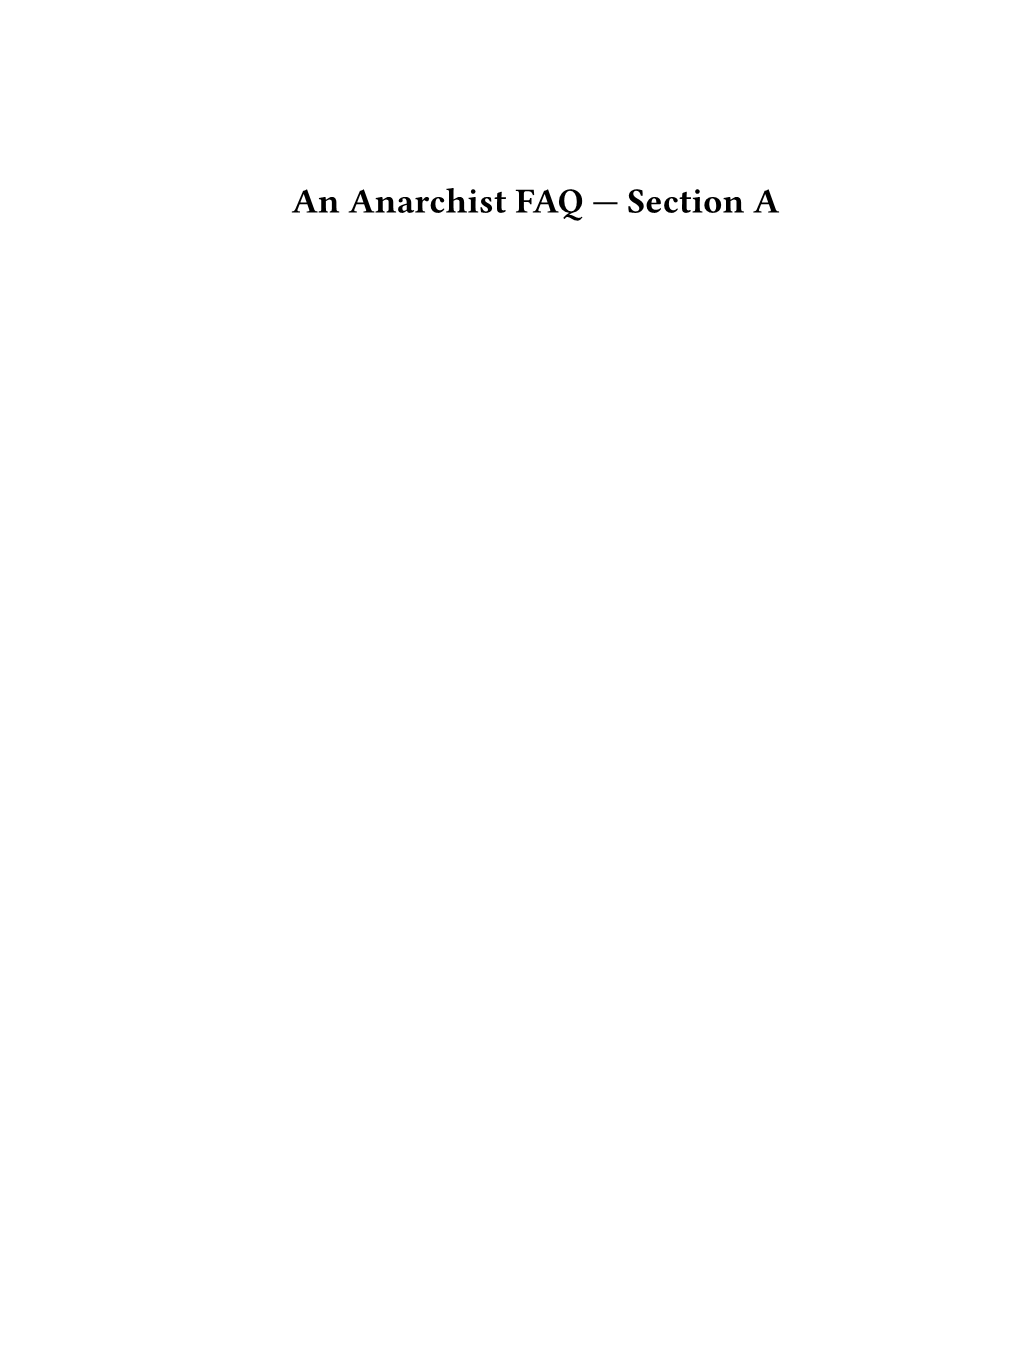 An Anarchist FAQ — Section a Contents